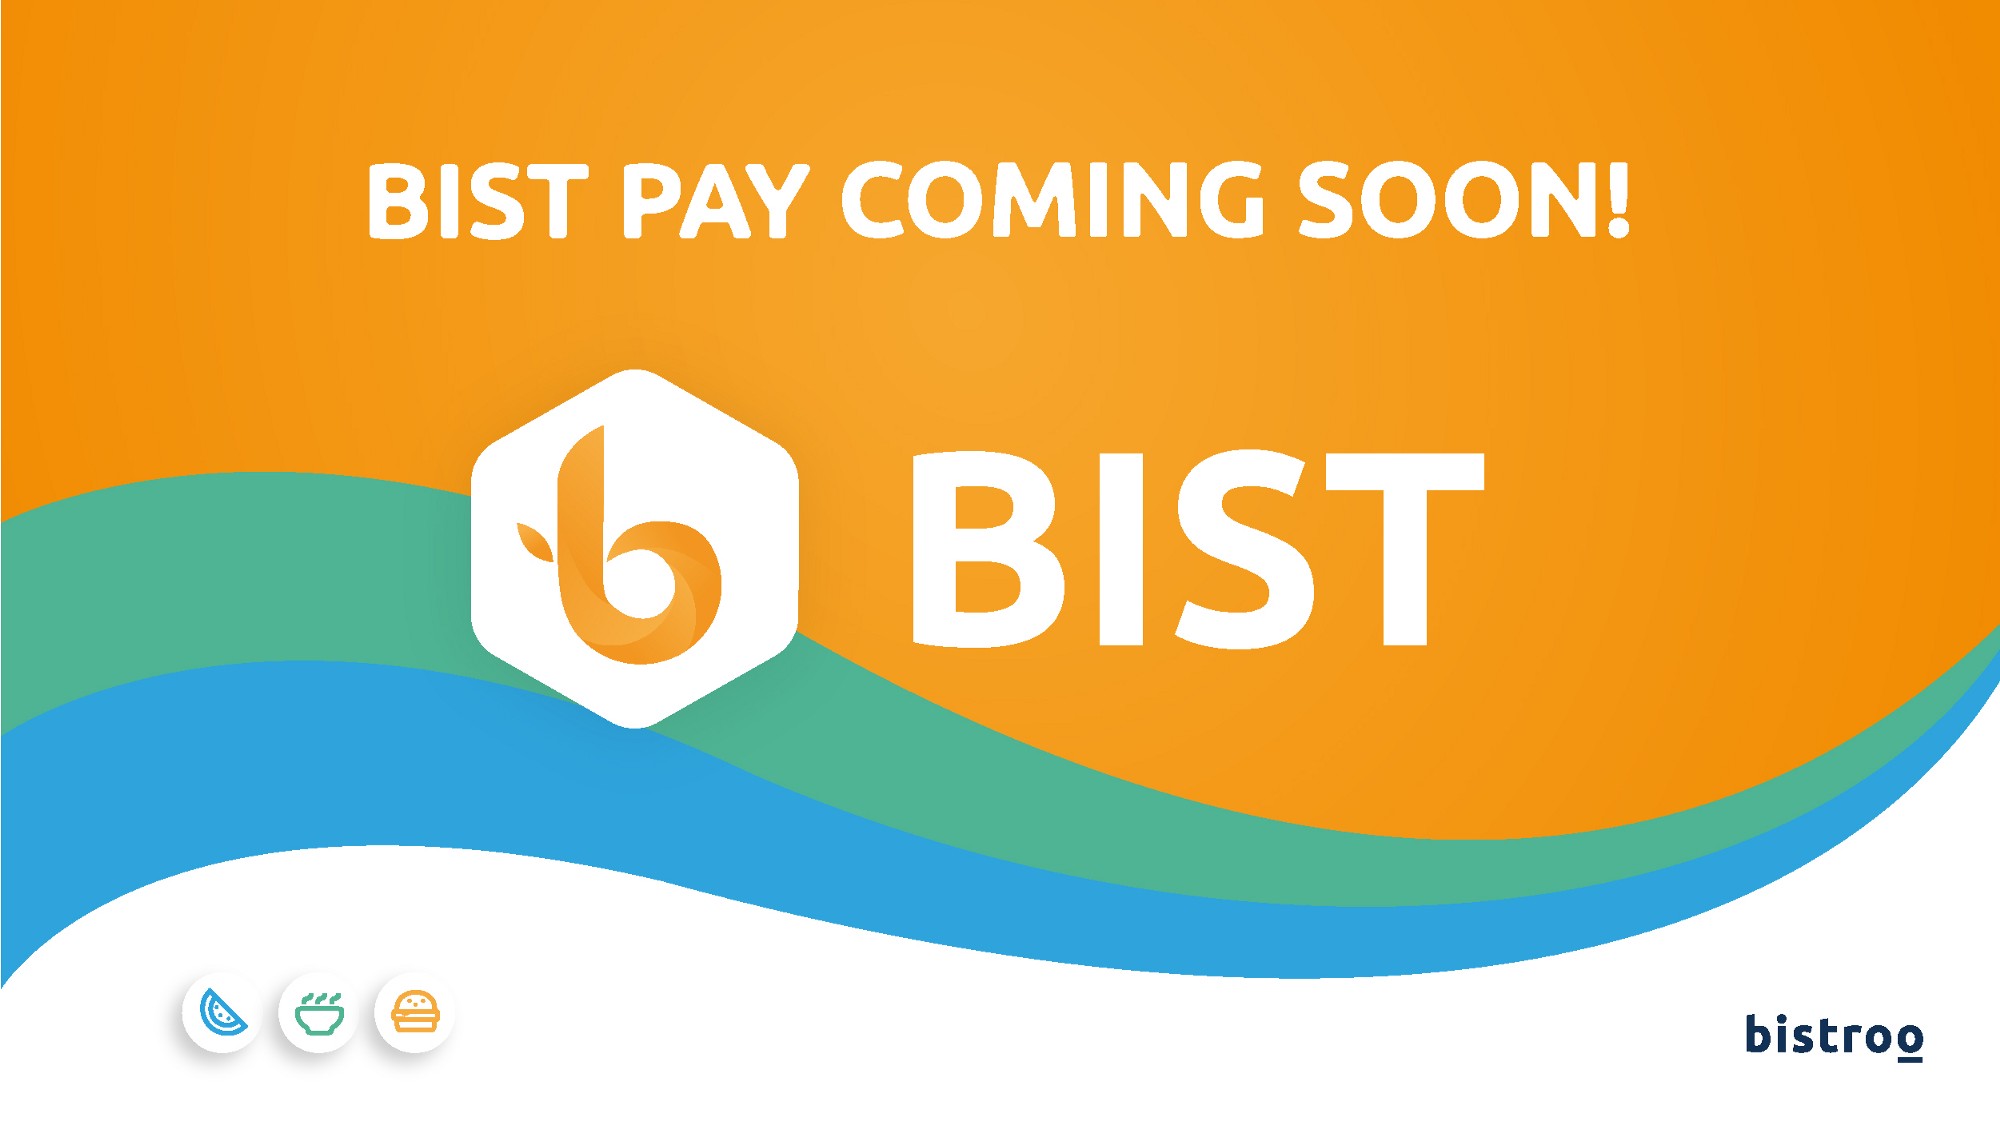 BIST payments coming soon to the Bistroo Marketplace